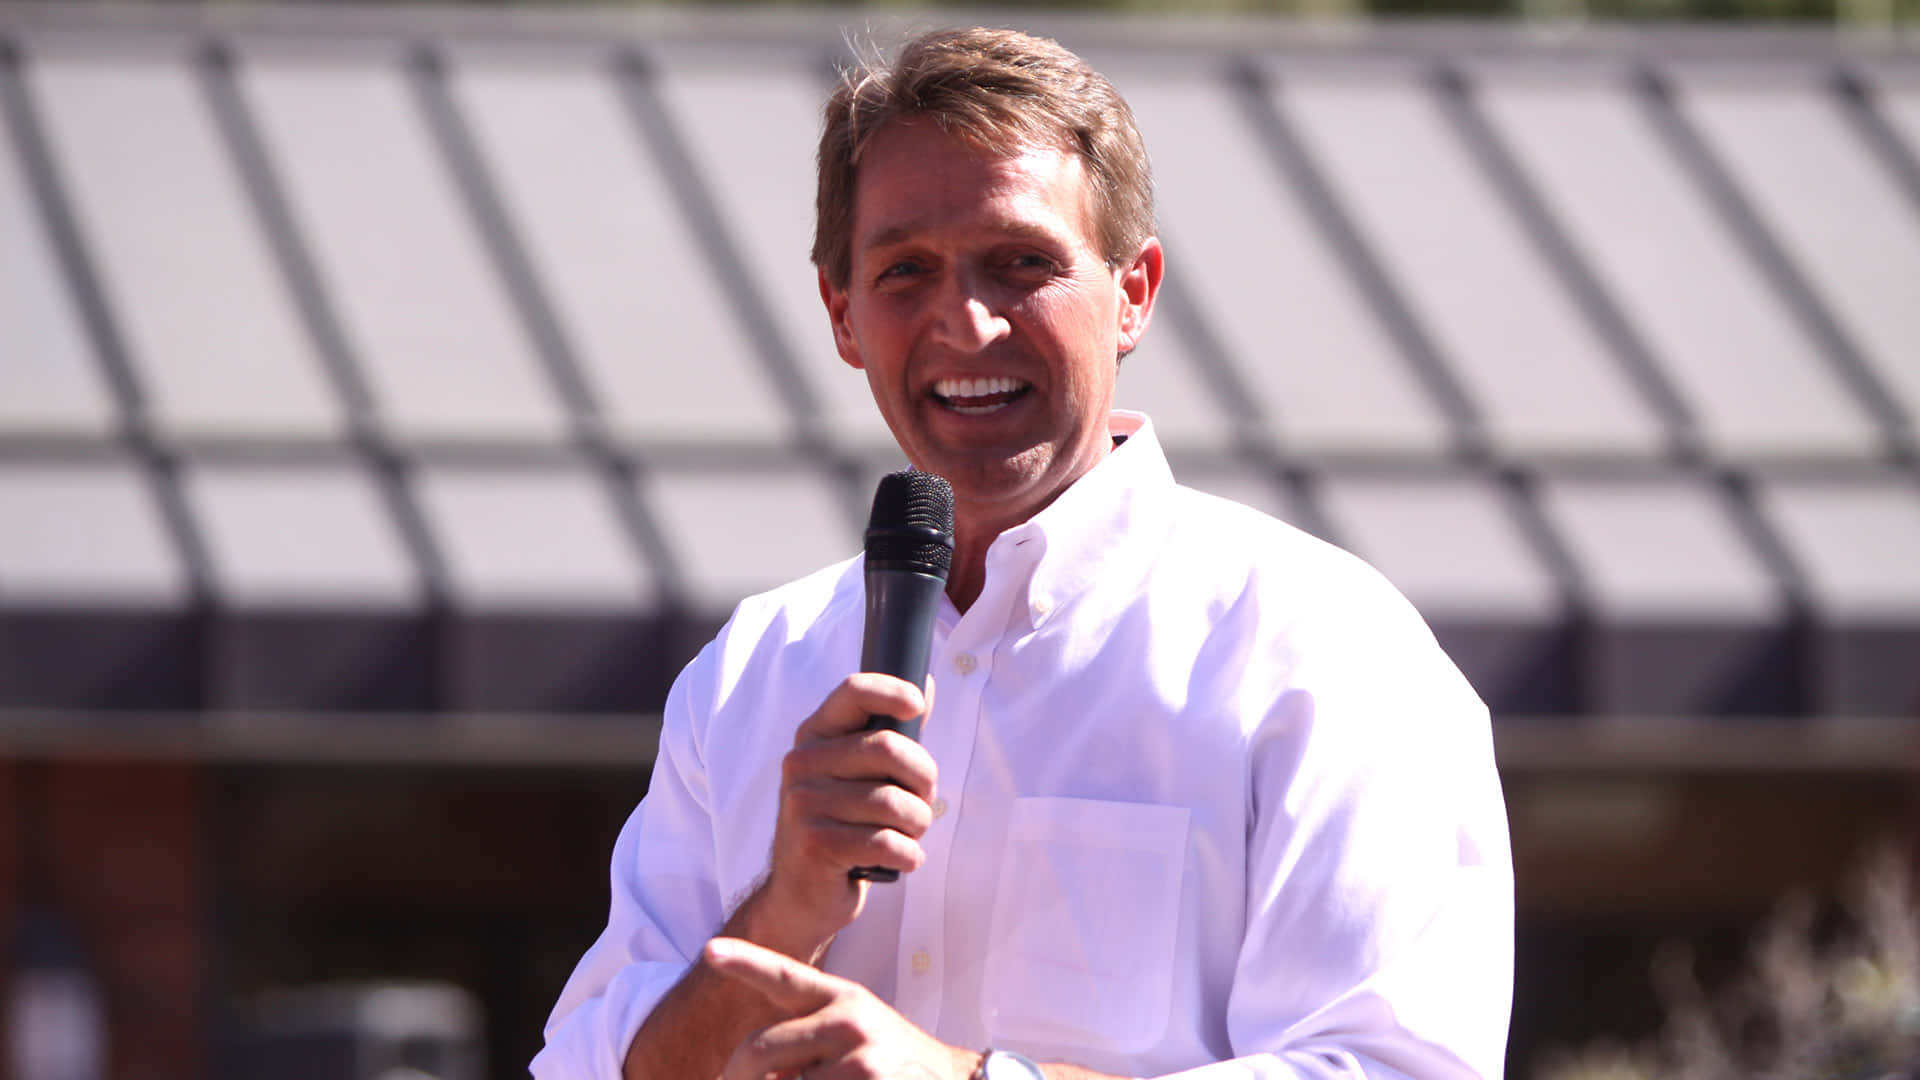 Jeff Flake Smiling While Holding Microphone Wallpaper